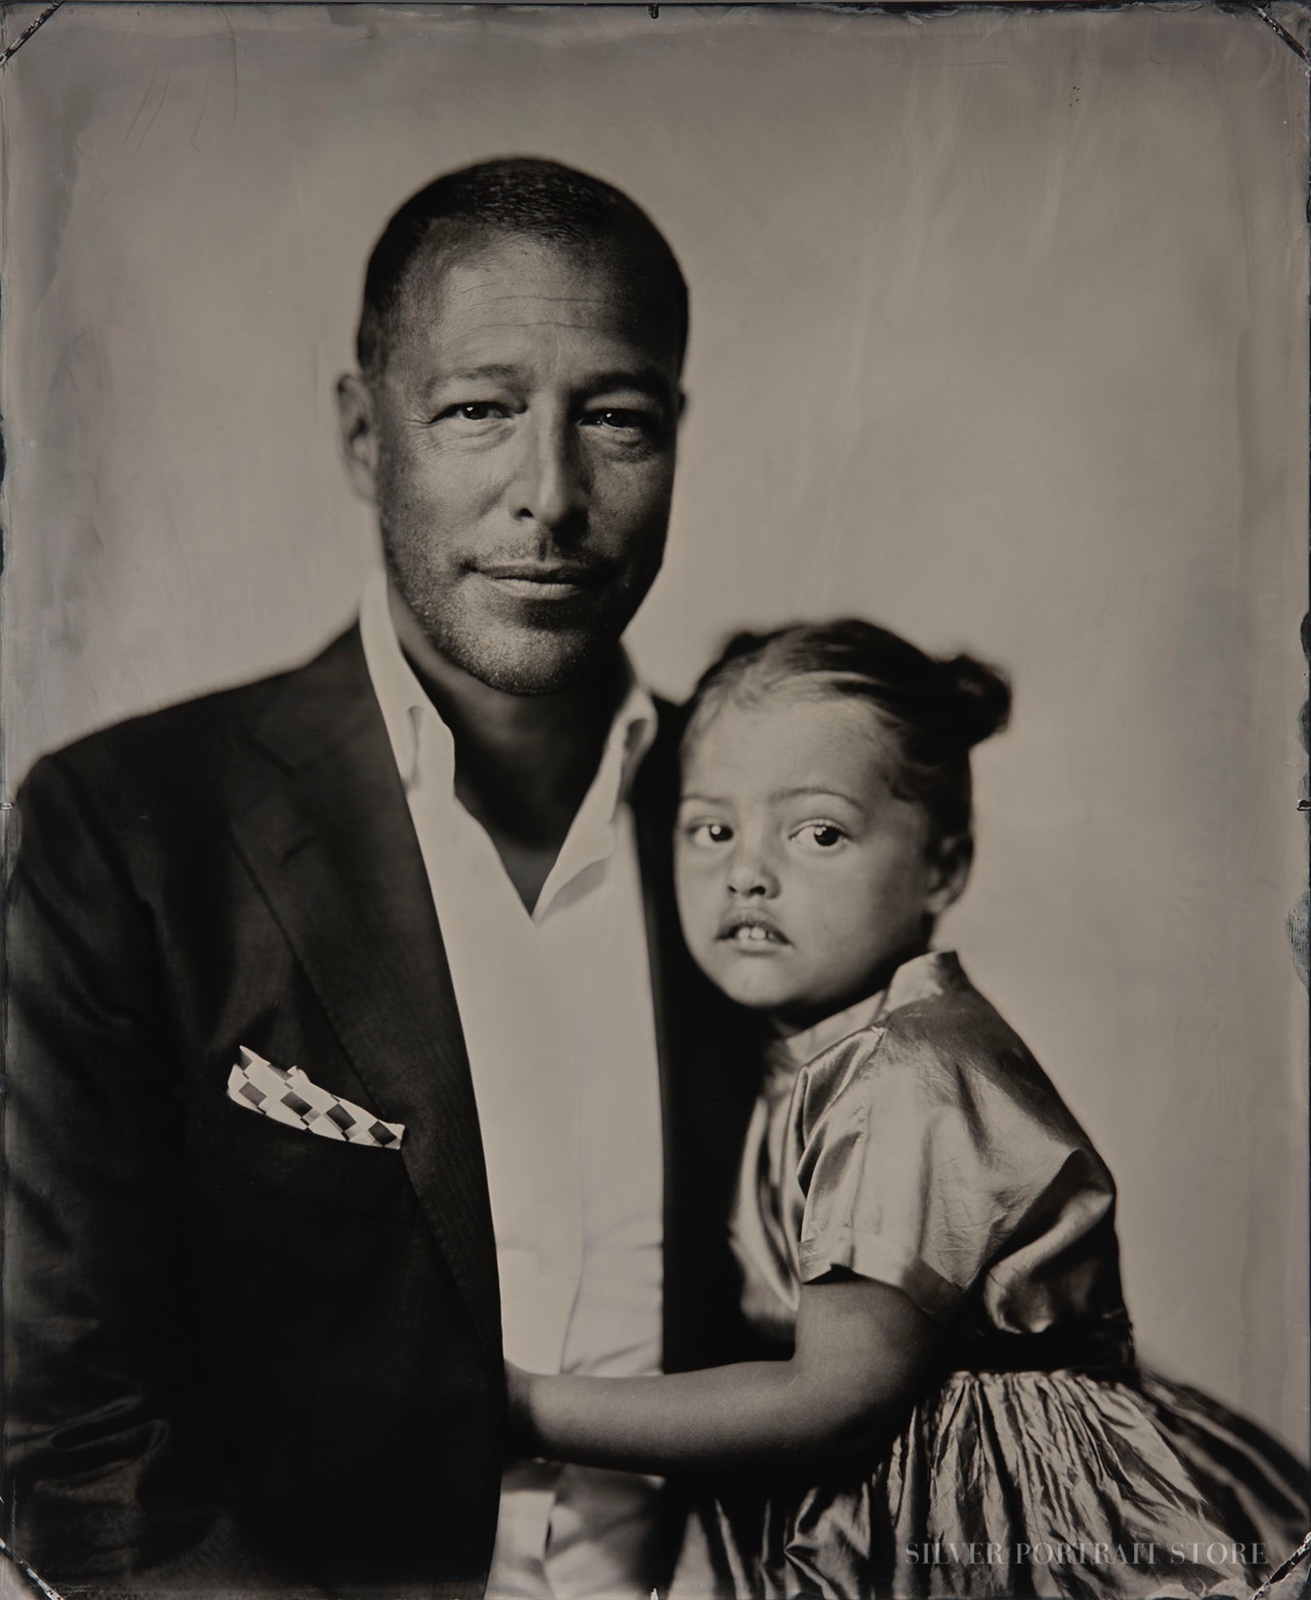 Benjamin & Lupe-Silver Portrait Store-Wet plate collodion-Black glass Ambrotype 35 x 43 cm.